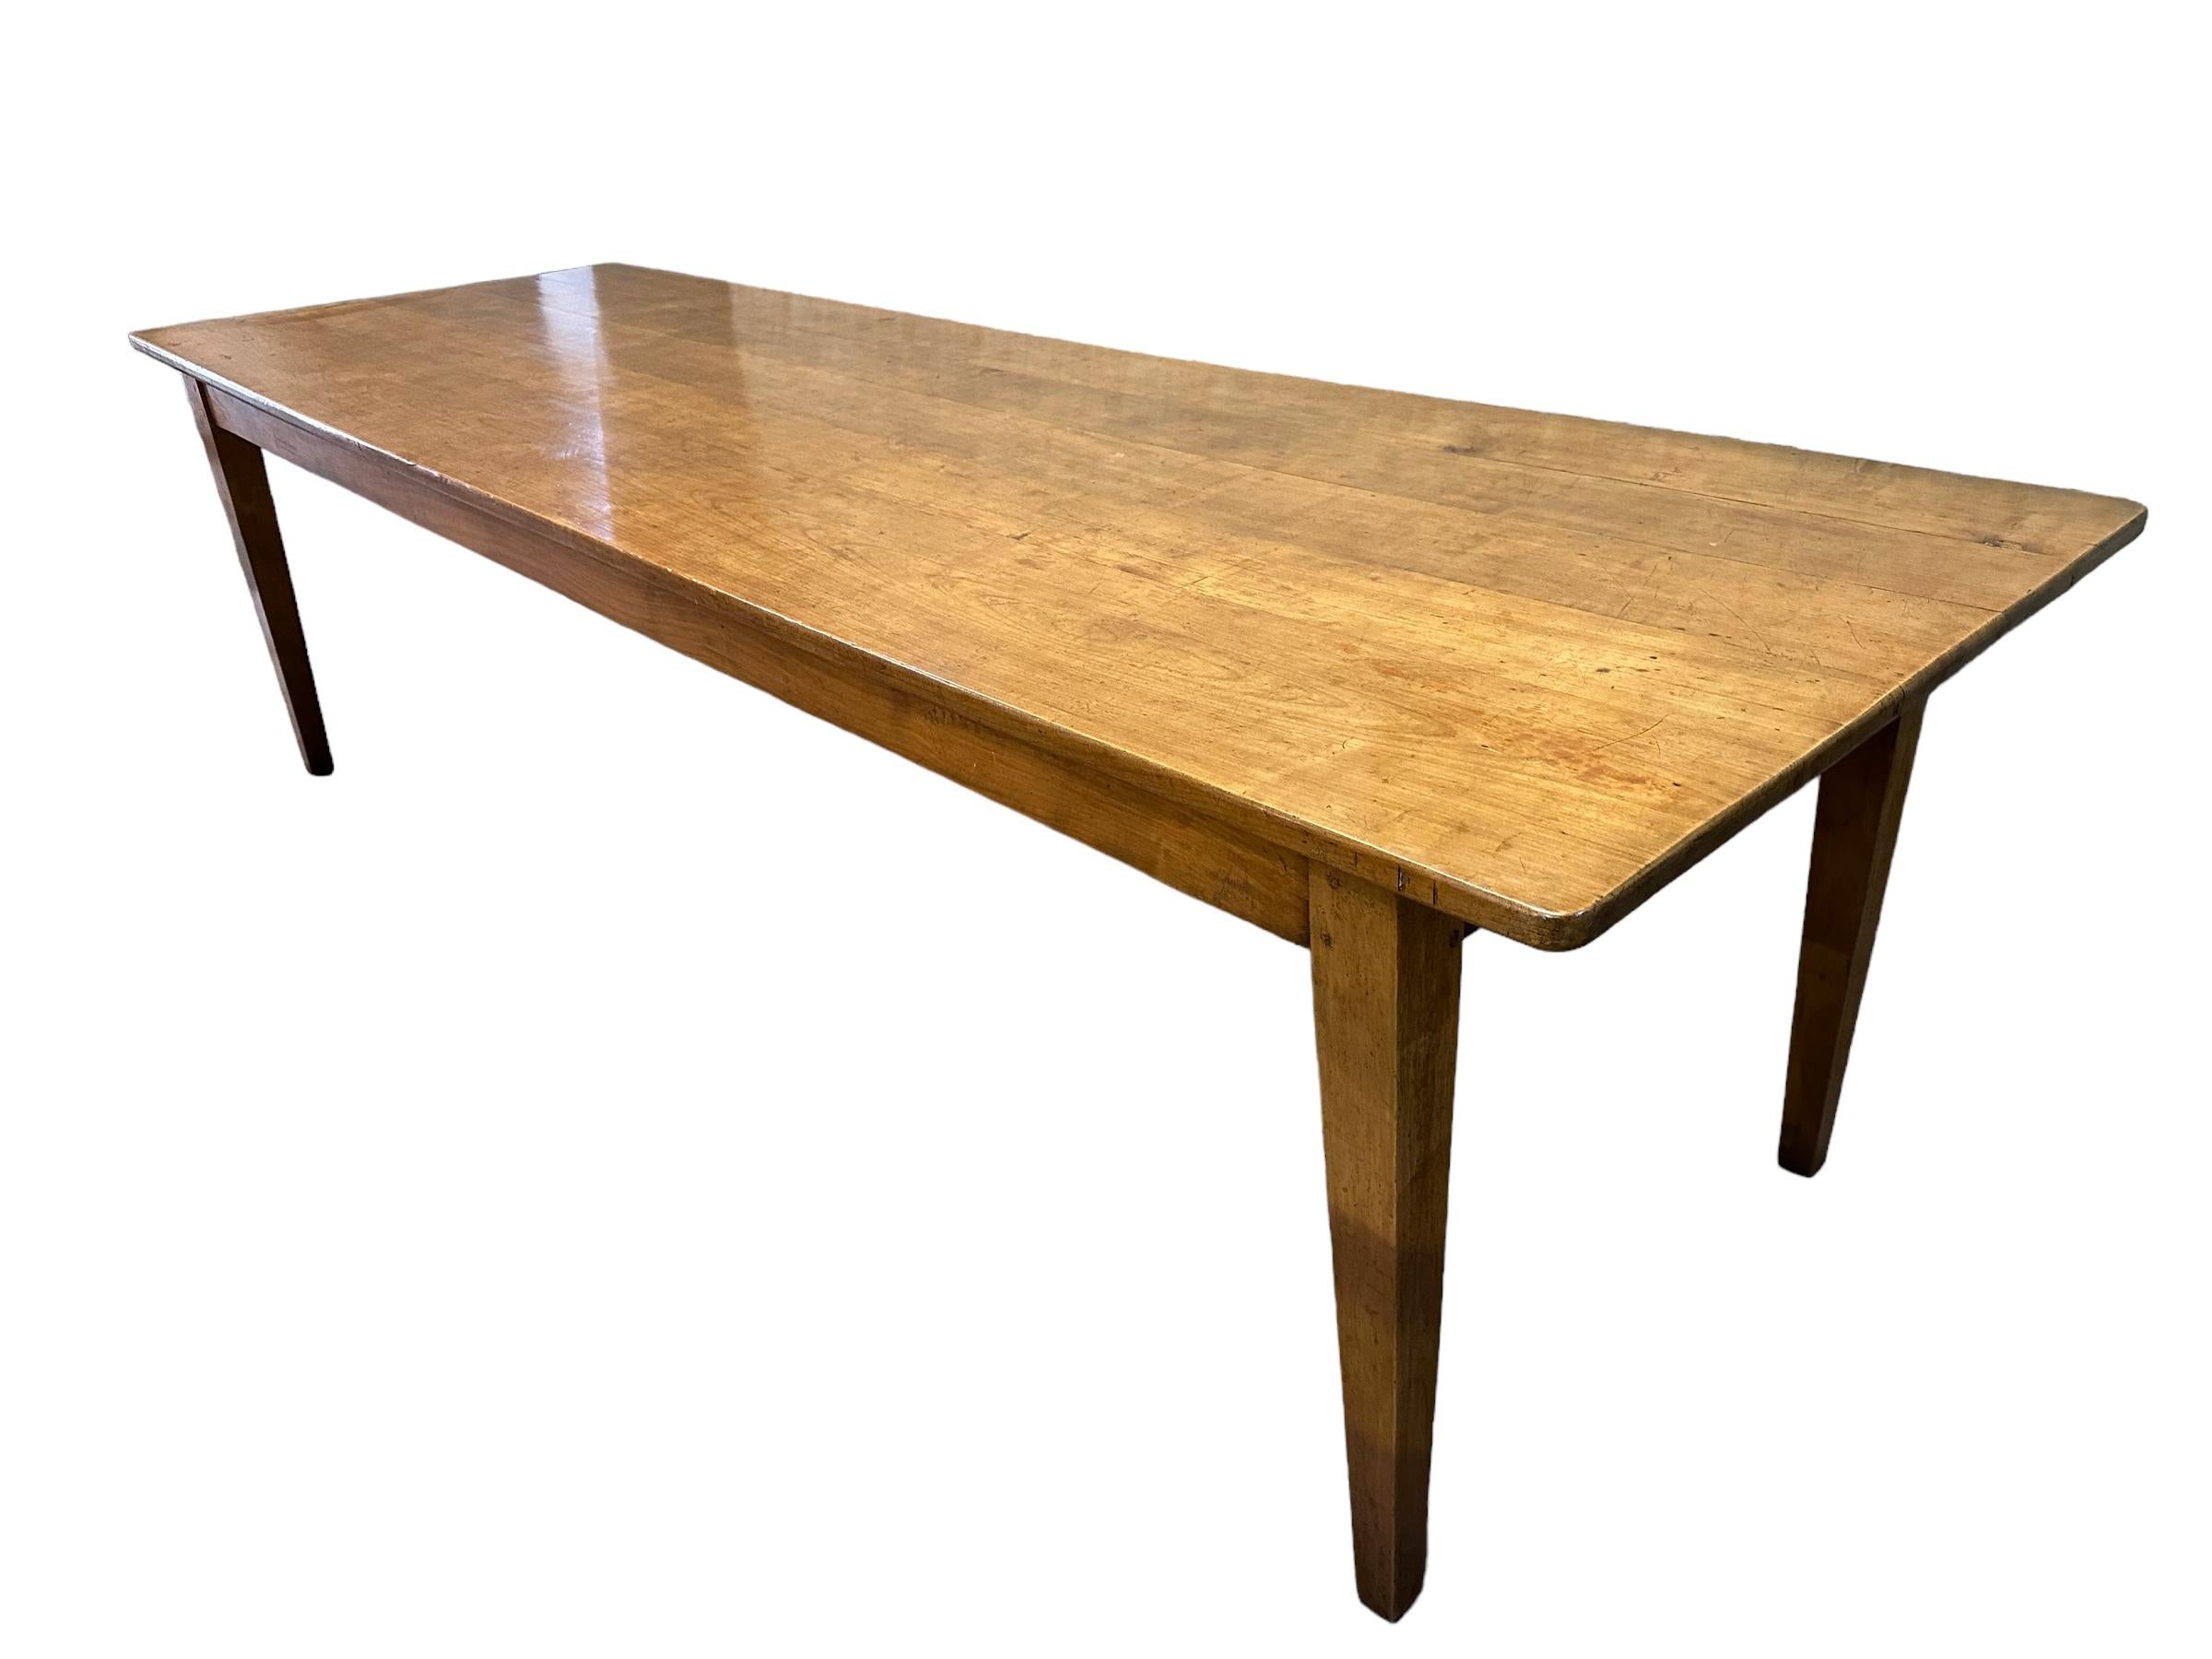 The image showcases an exquisite antique cherry table with tapered legs and a sturdy base. The table features a beautiful patination which adds character and depth to its overall appearance. The stunning colour of the cherry wood is showcased in the